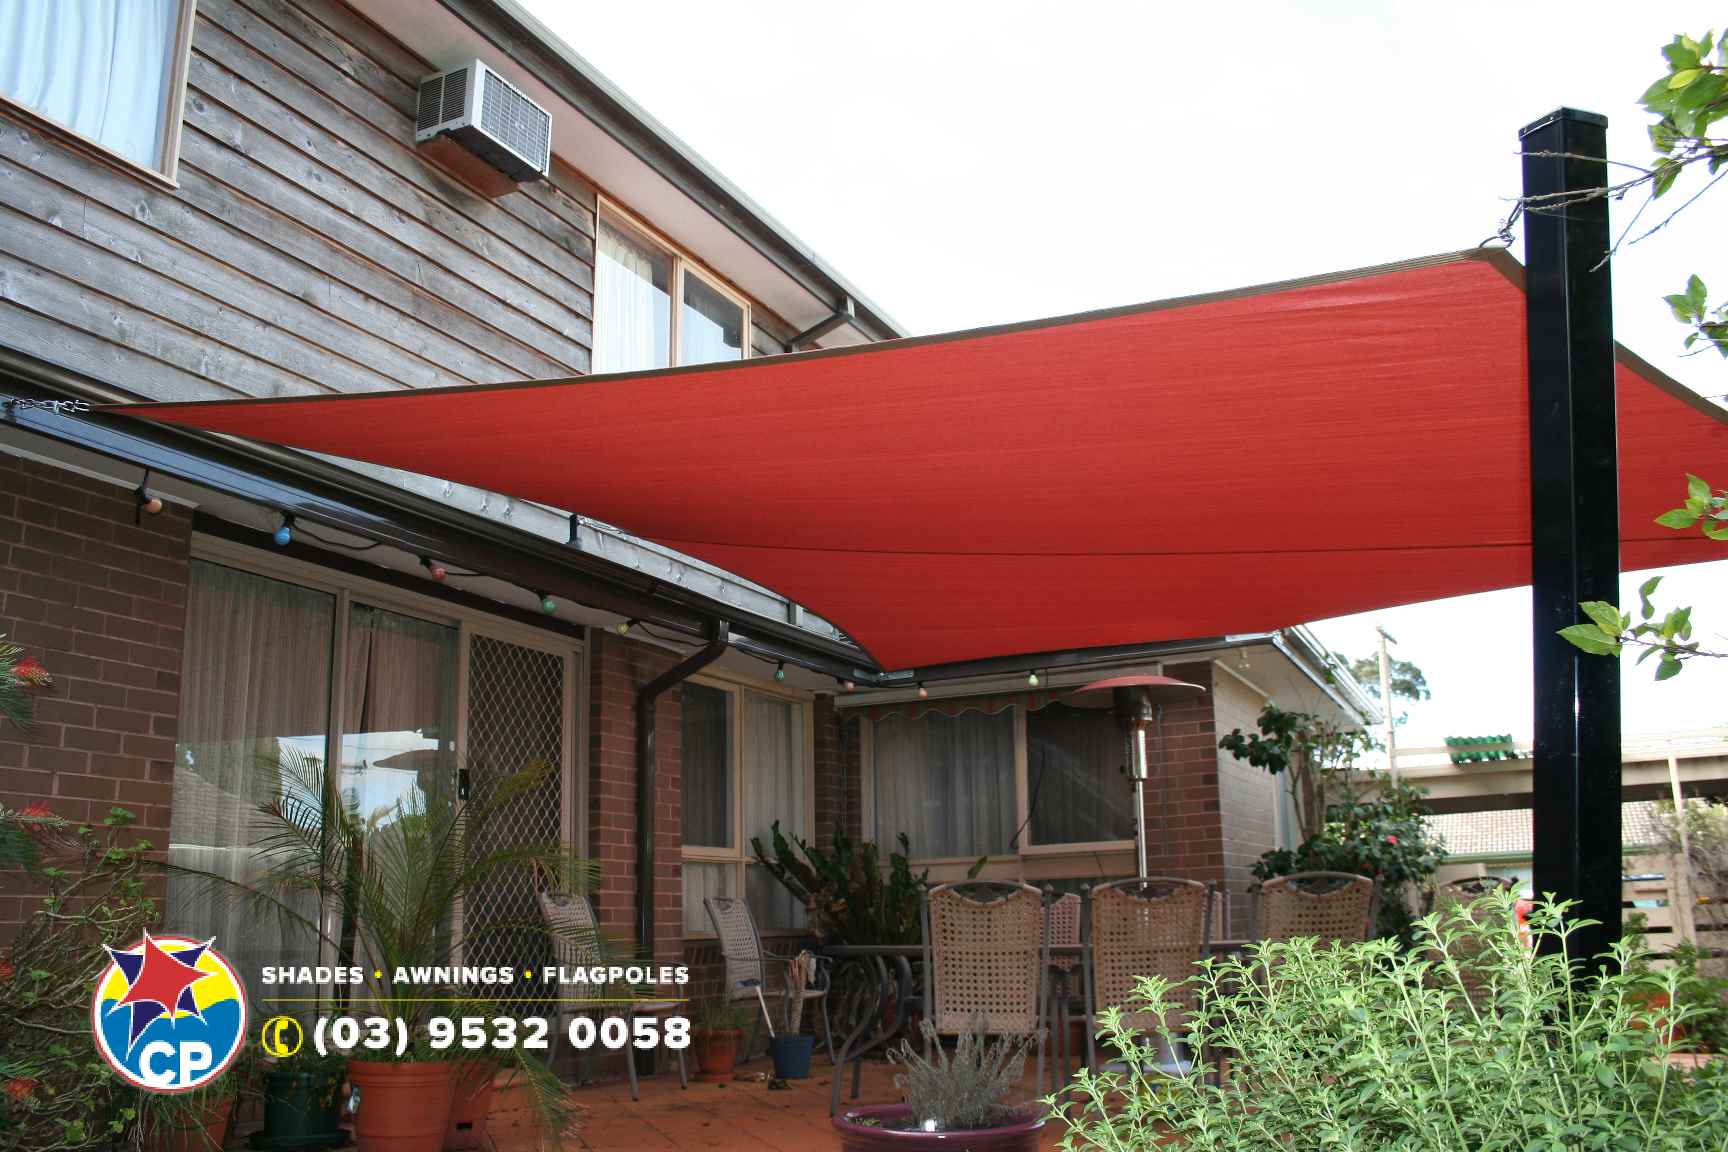 Shade patio large red.jpg